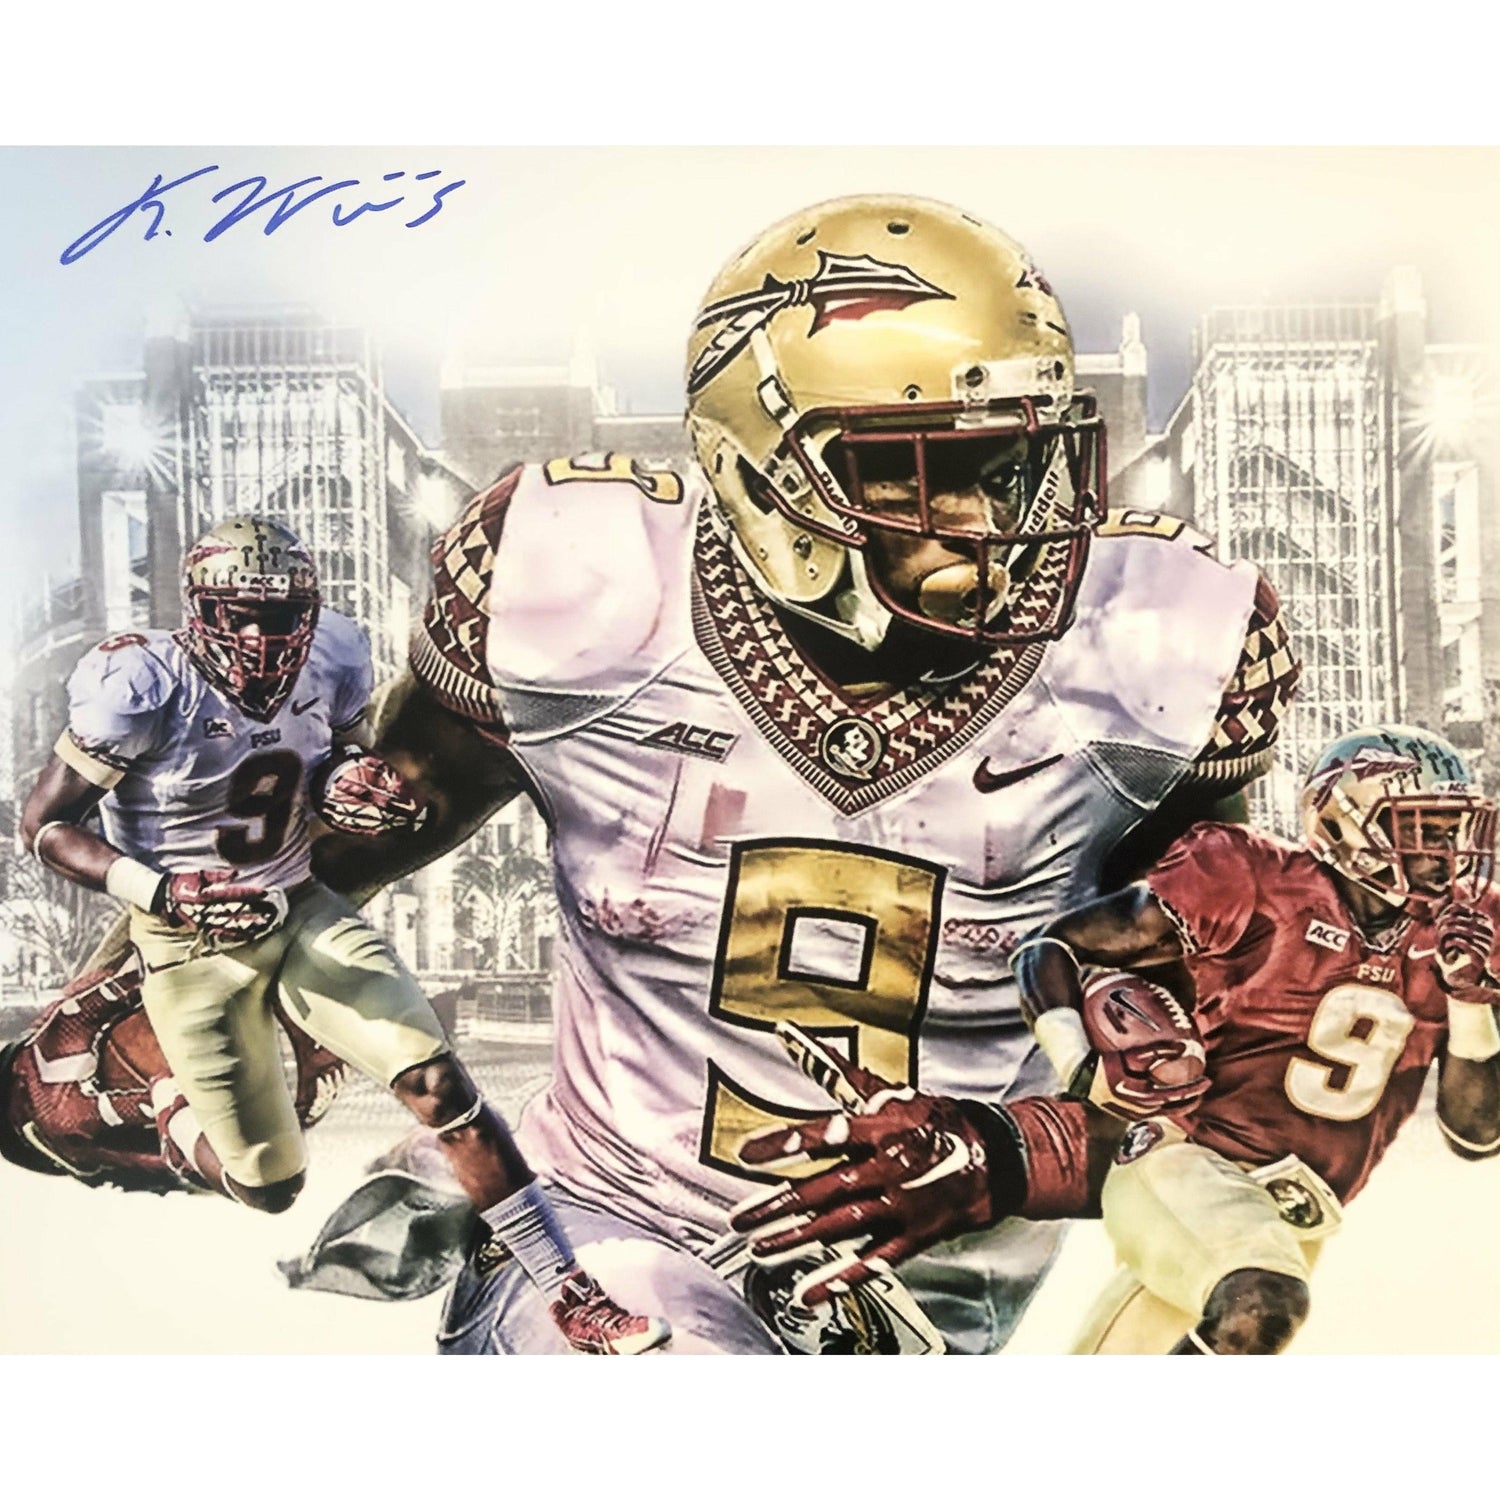 Karlos Williams "Limited Edition" Signed 8x10 - Fan Arch